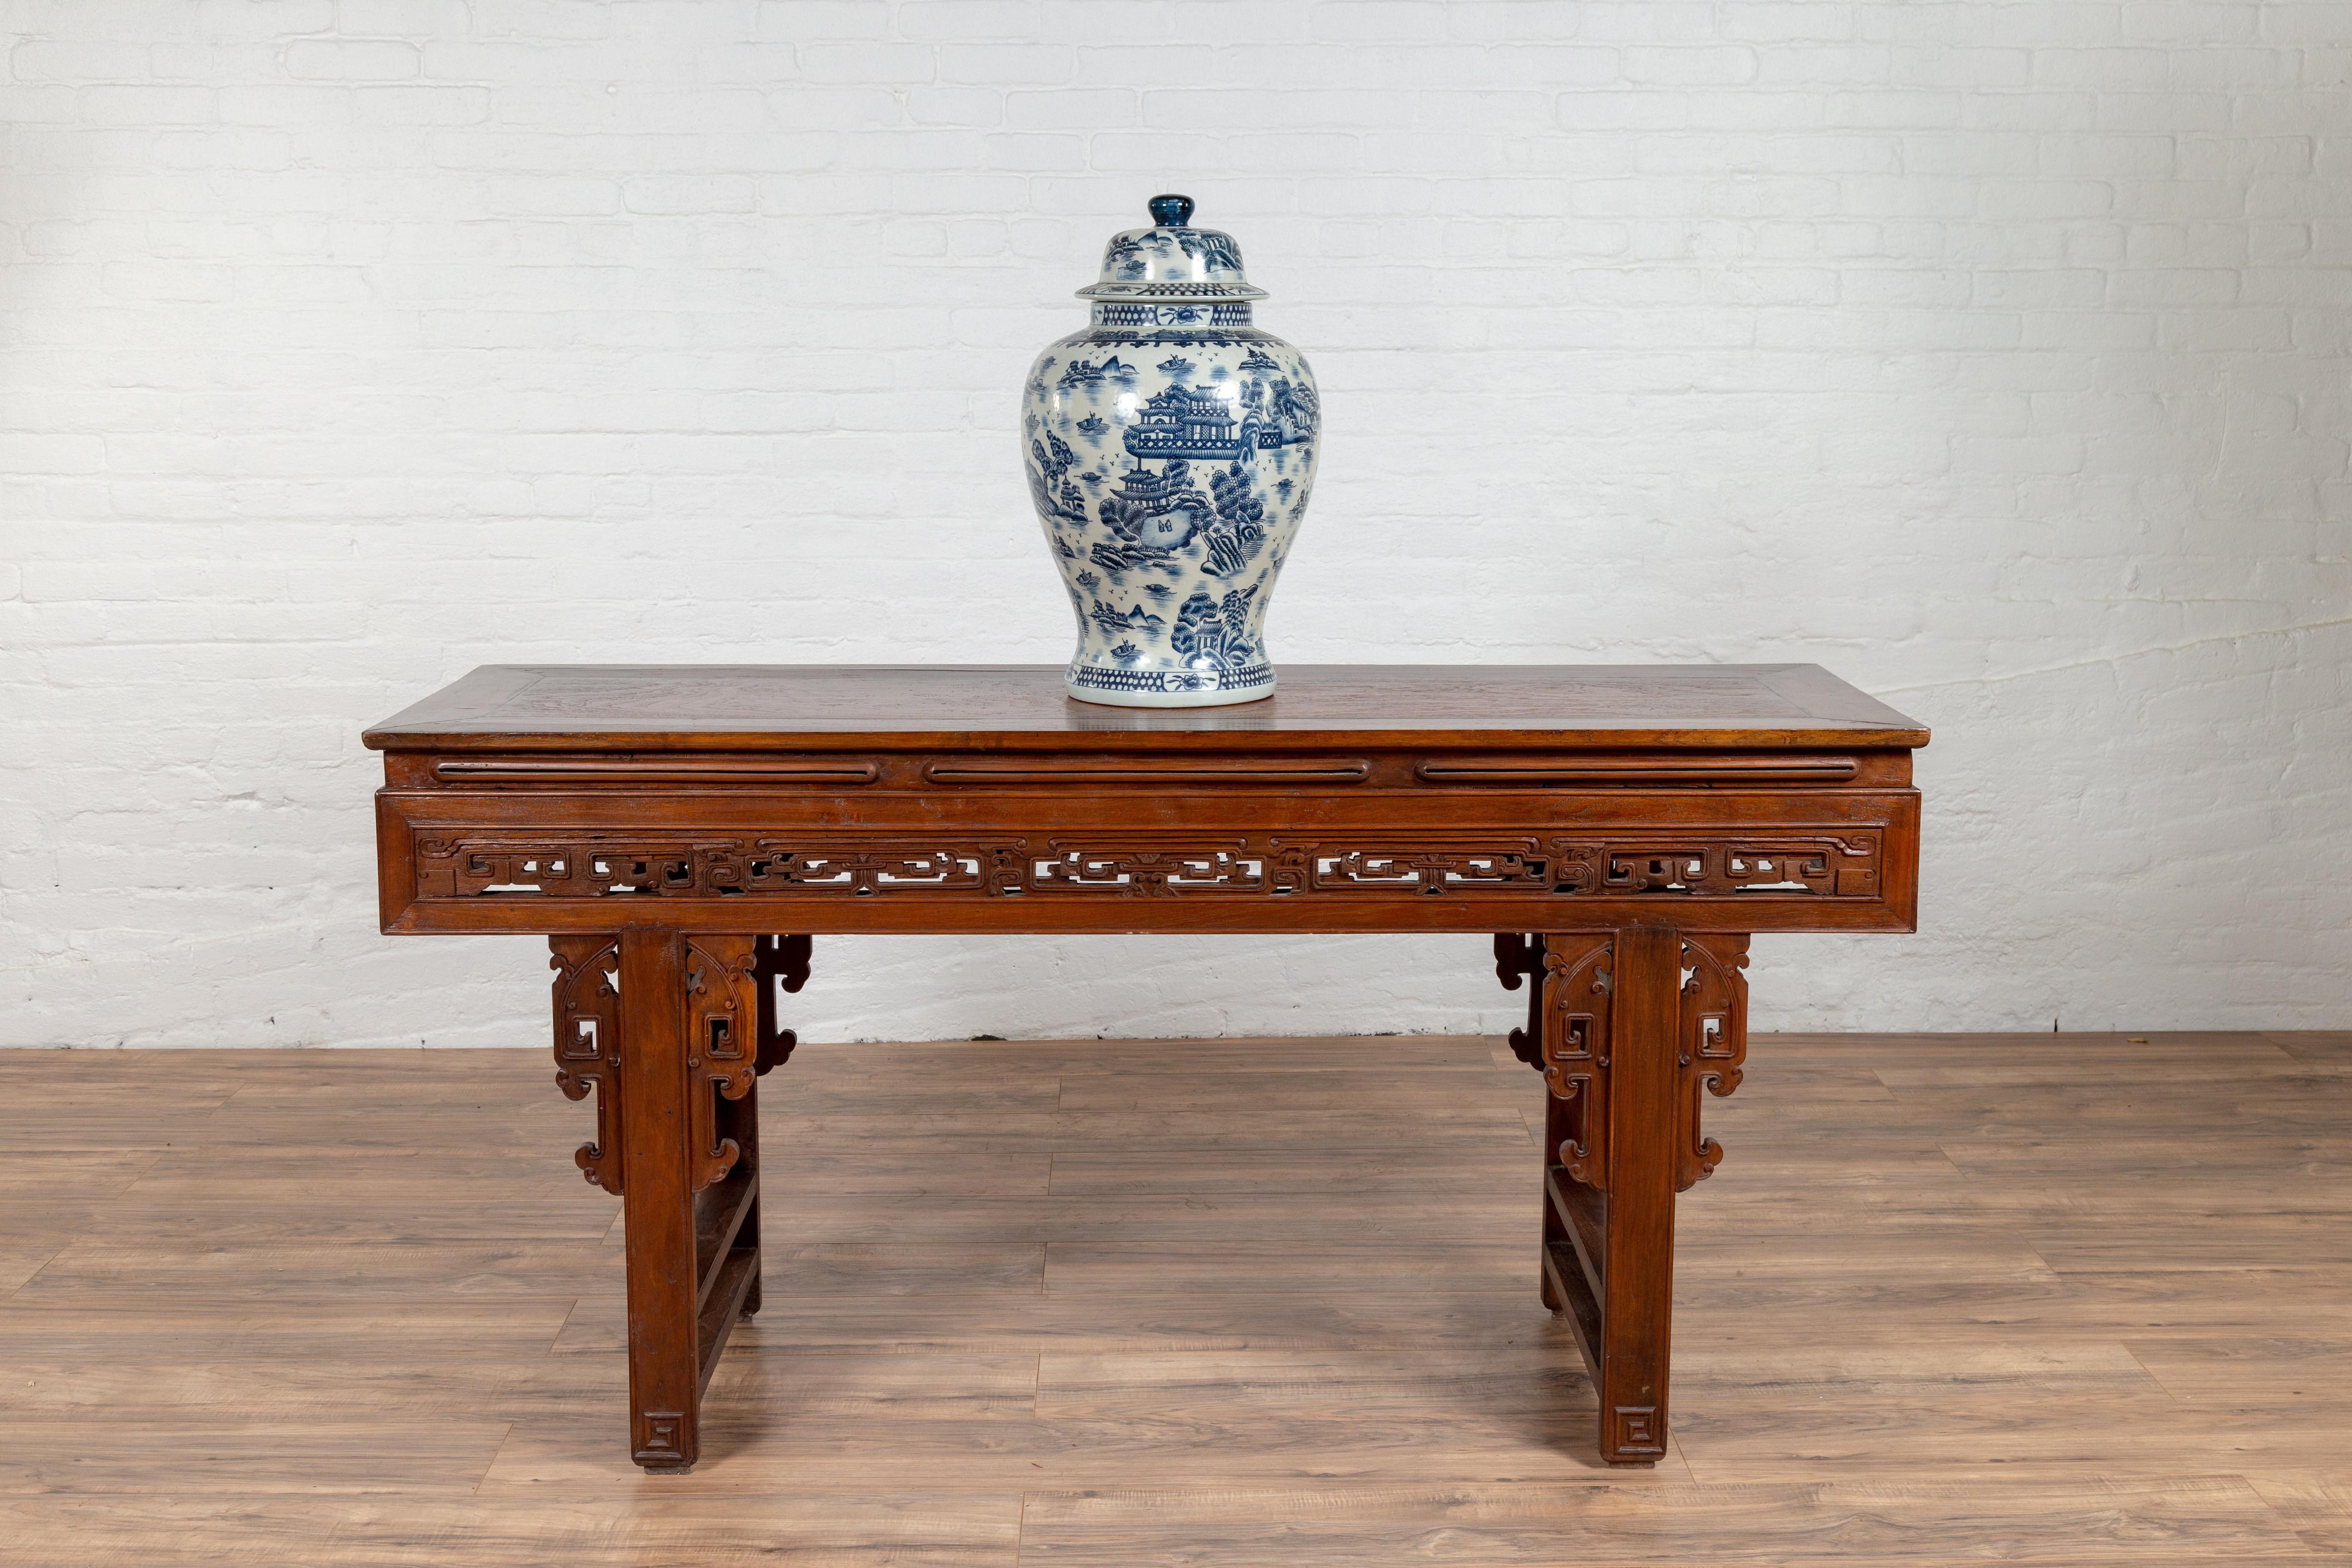 A Chinese antique altar console table with overhang top and open fretwork on scroll frieze from the early 20th century. This Chinese altar table charms our eyes with its exquisite Silhouette and delicate décor! It features a rectangular planked top